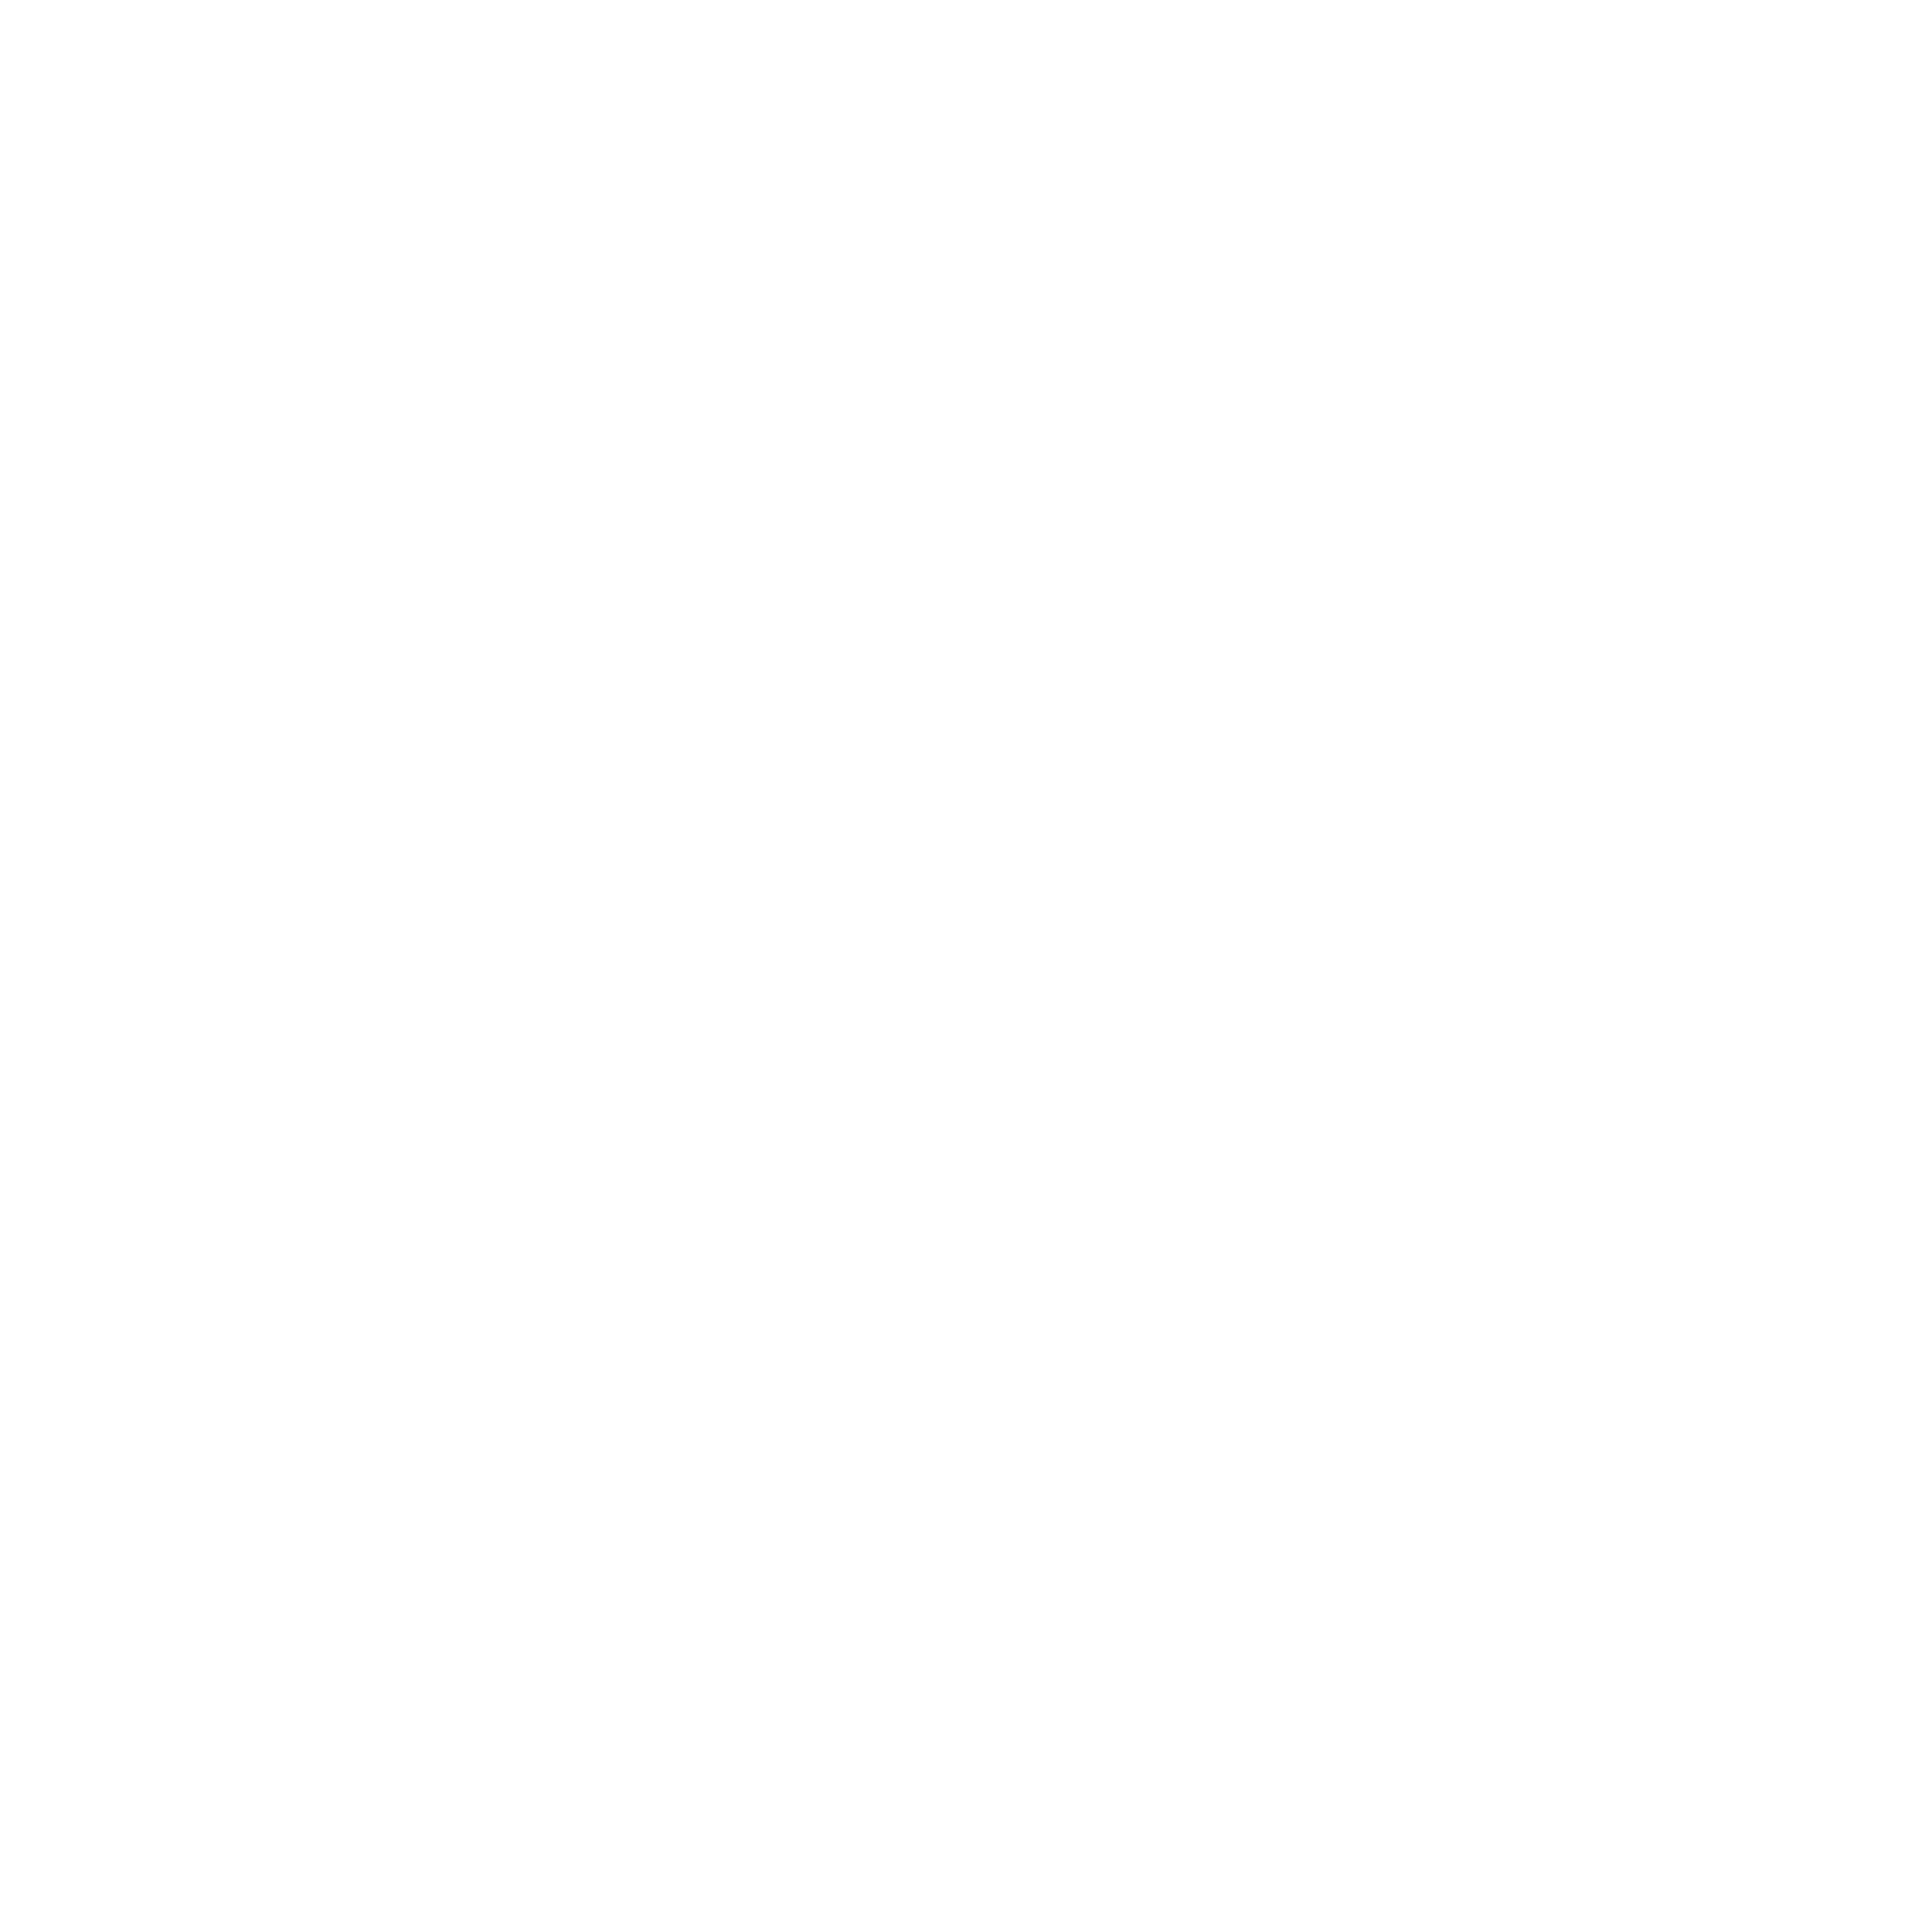 5812 Investment Group 